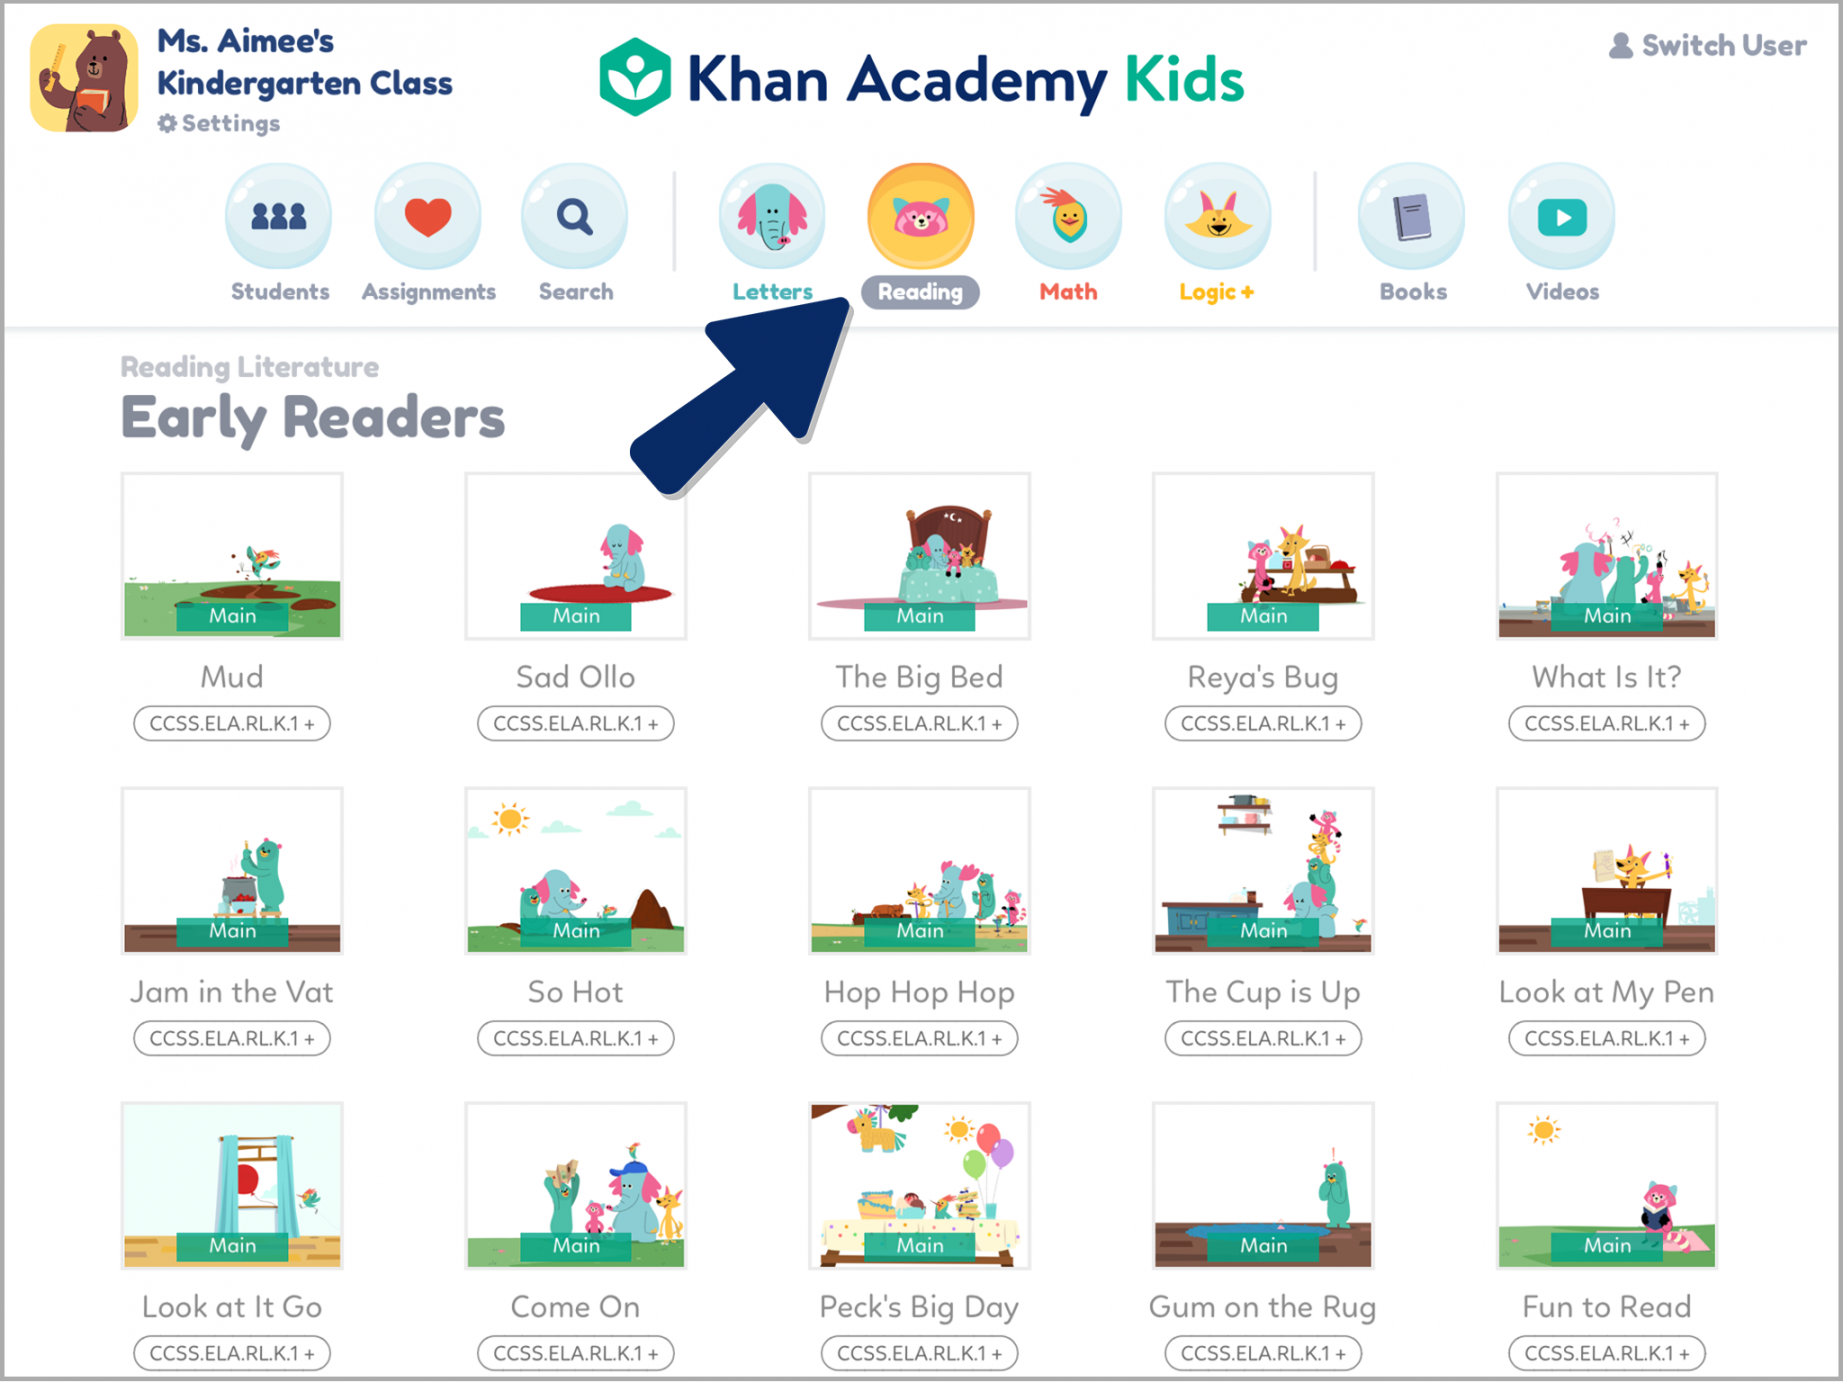 Learn more about the books in the Khan Academy Kids app – Khan Academy